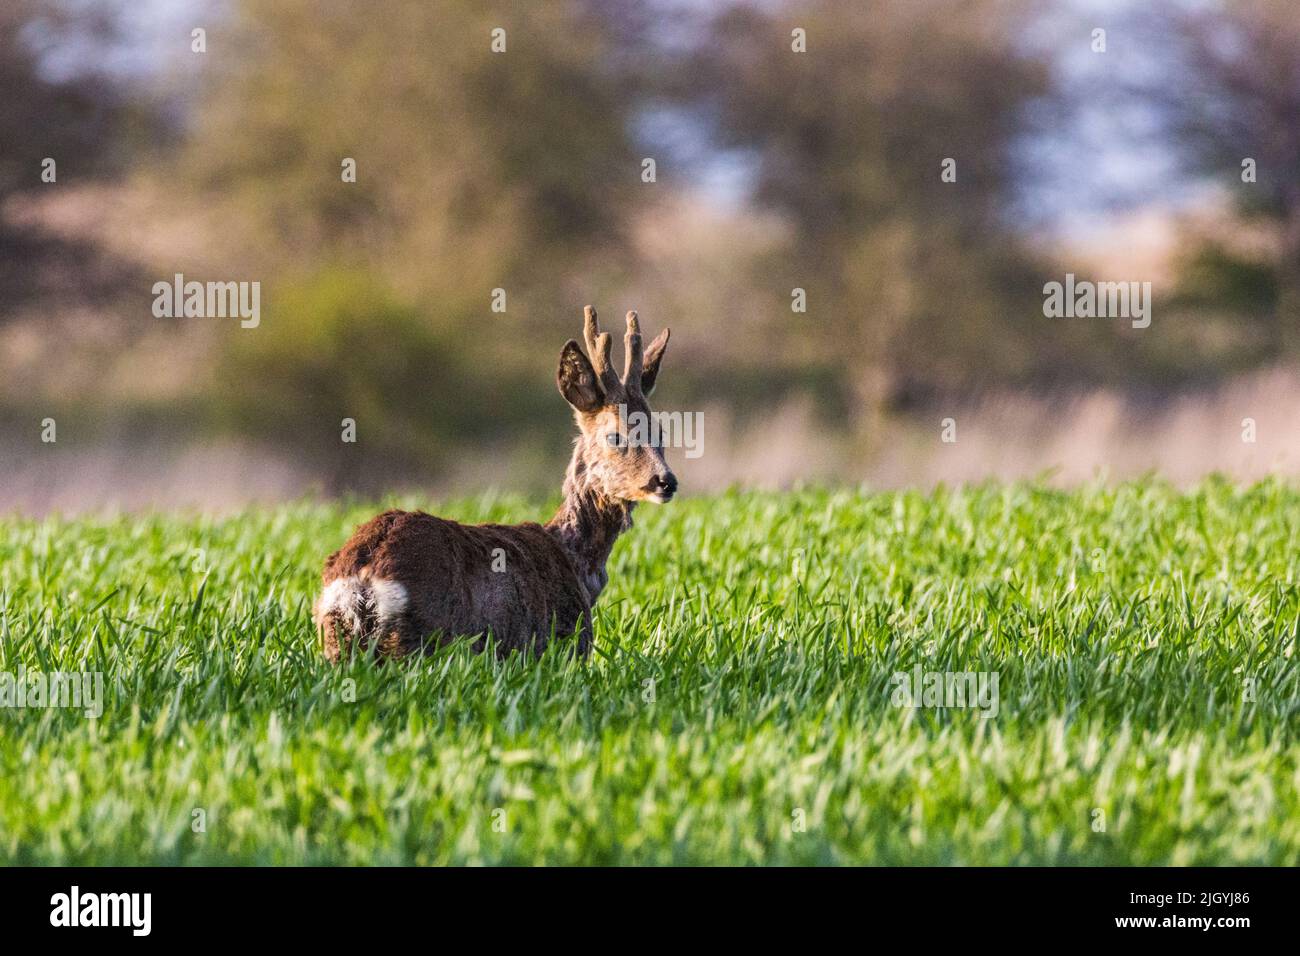 Roebuck in a sunlit field, looking at the camera Stock Photo